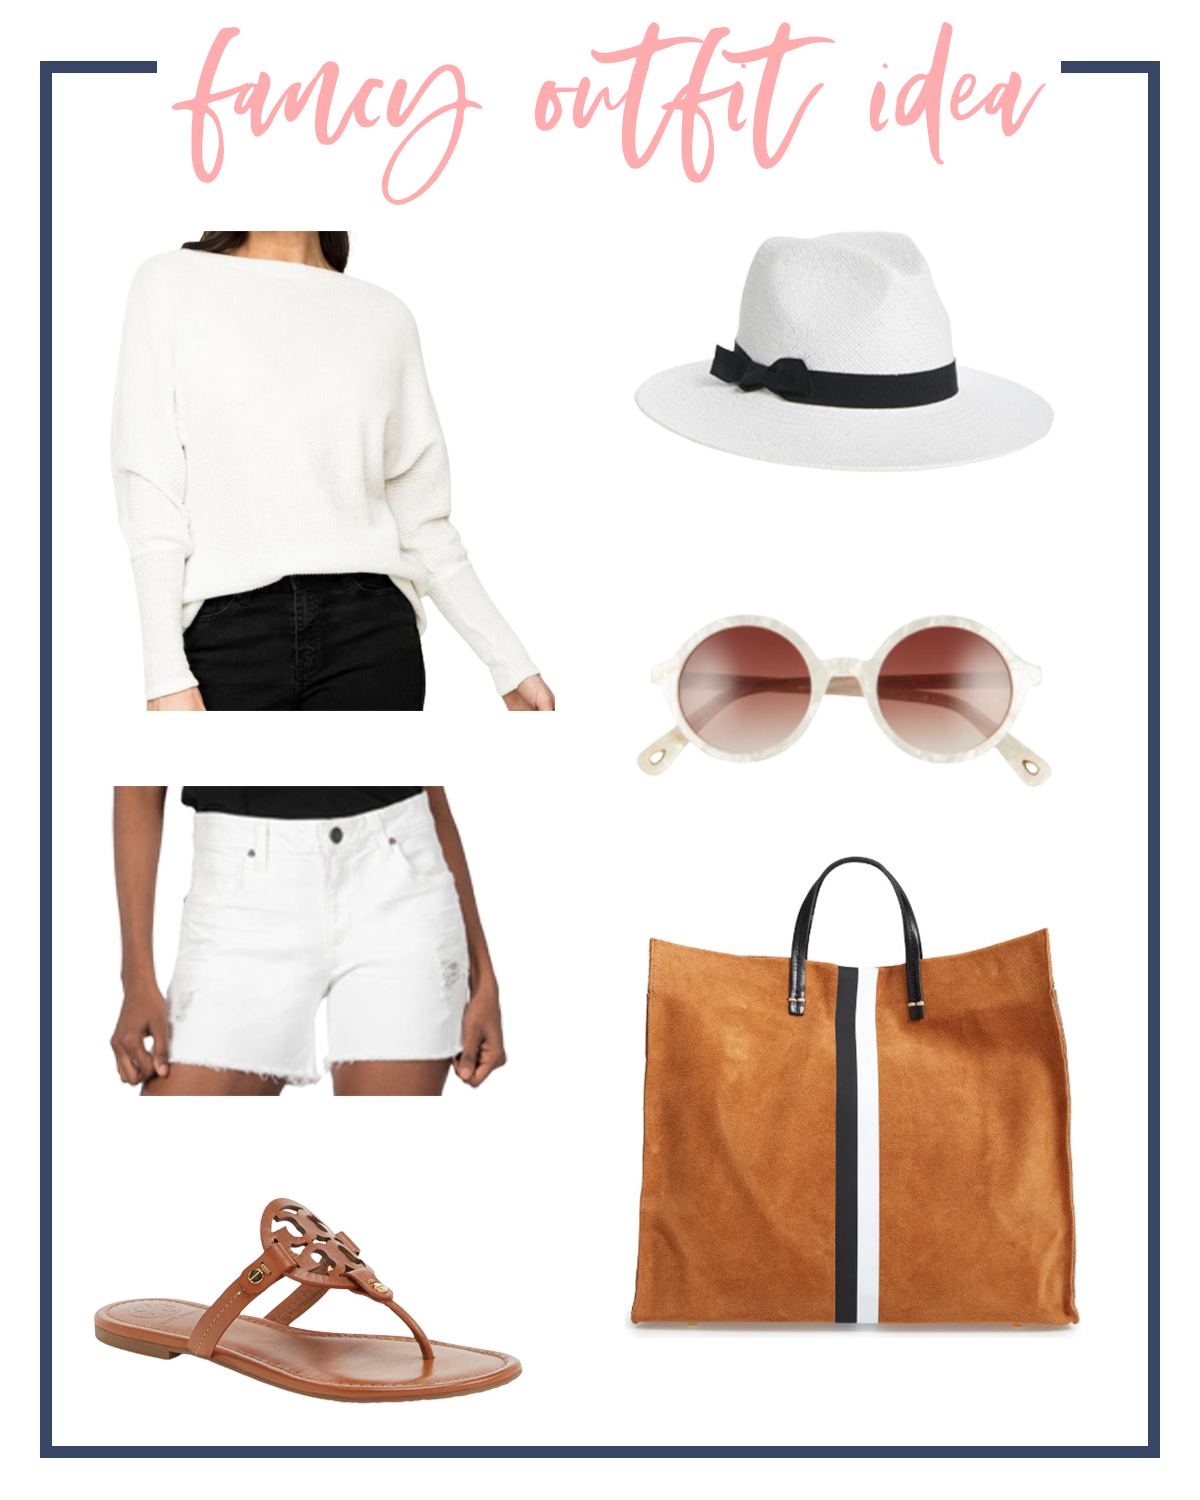 Denim Shorts by popular Houston fashion blog, Fancy Ashley: image of a white long sleeve sweater, white denim shorts, white fedor hat, round sunglasses, brown bag, and brown Tory Burch slide sandals. 